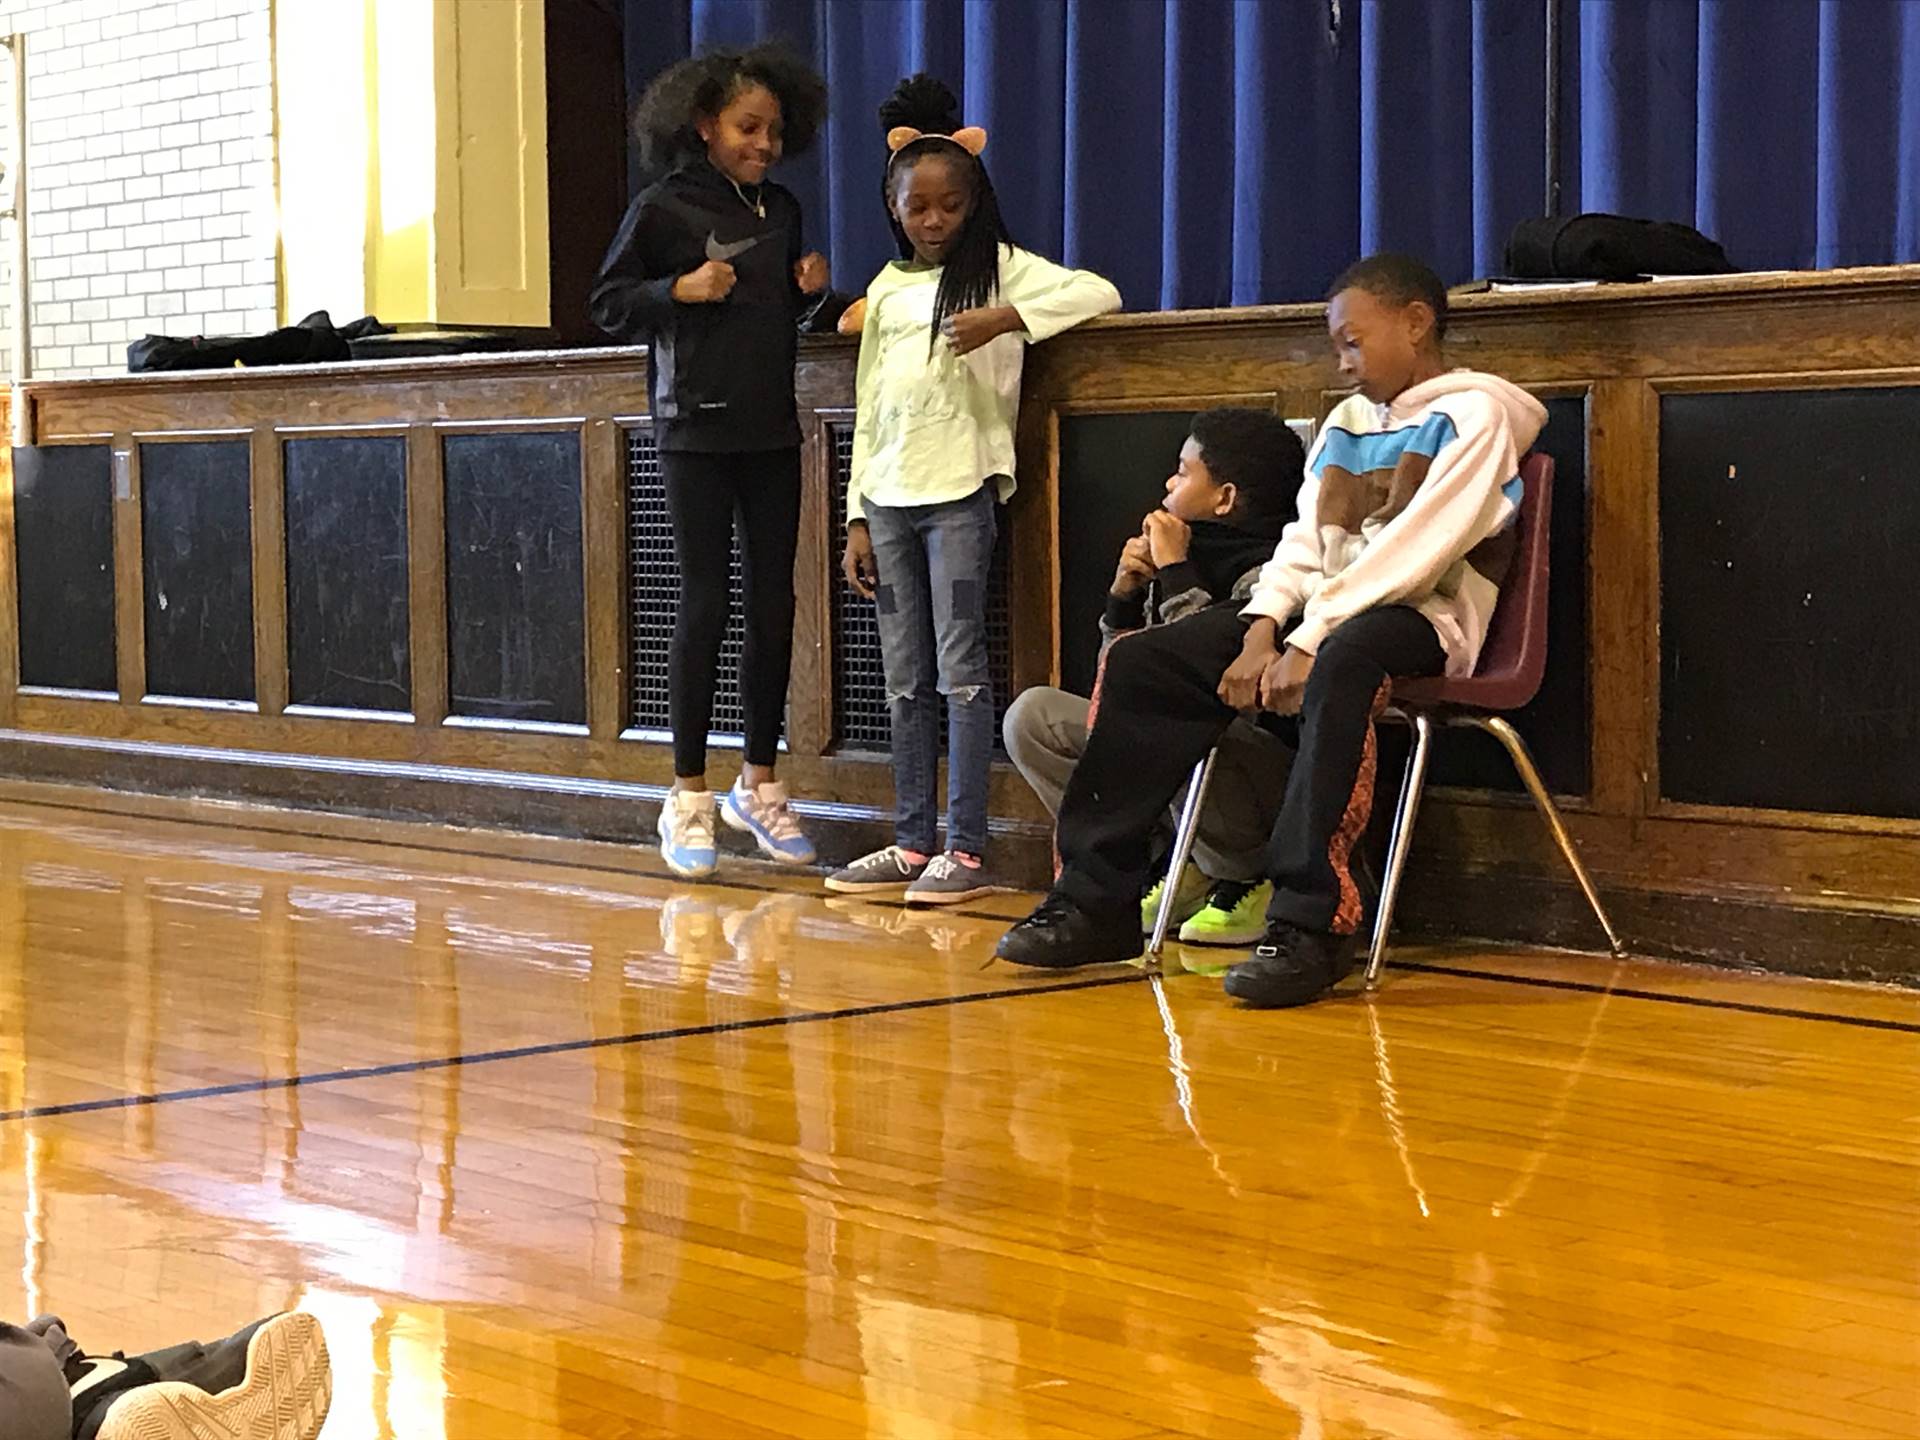 Students perform skits for one another demonstrating the Disney Promises!